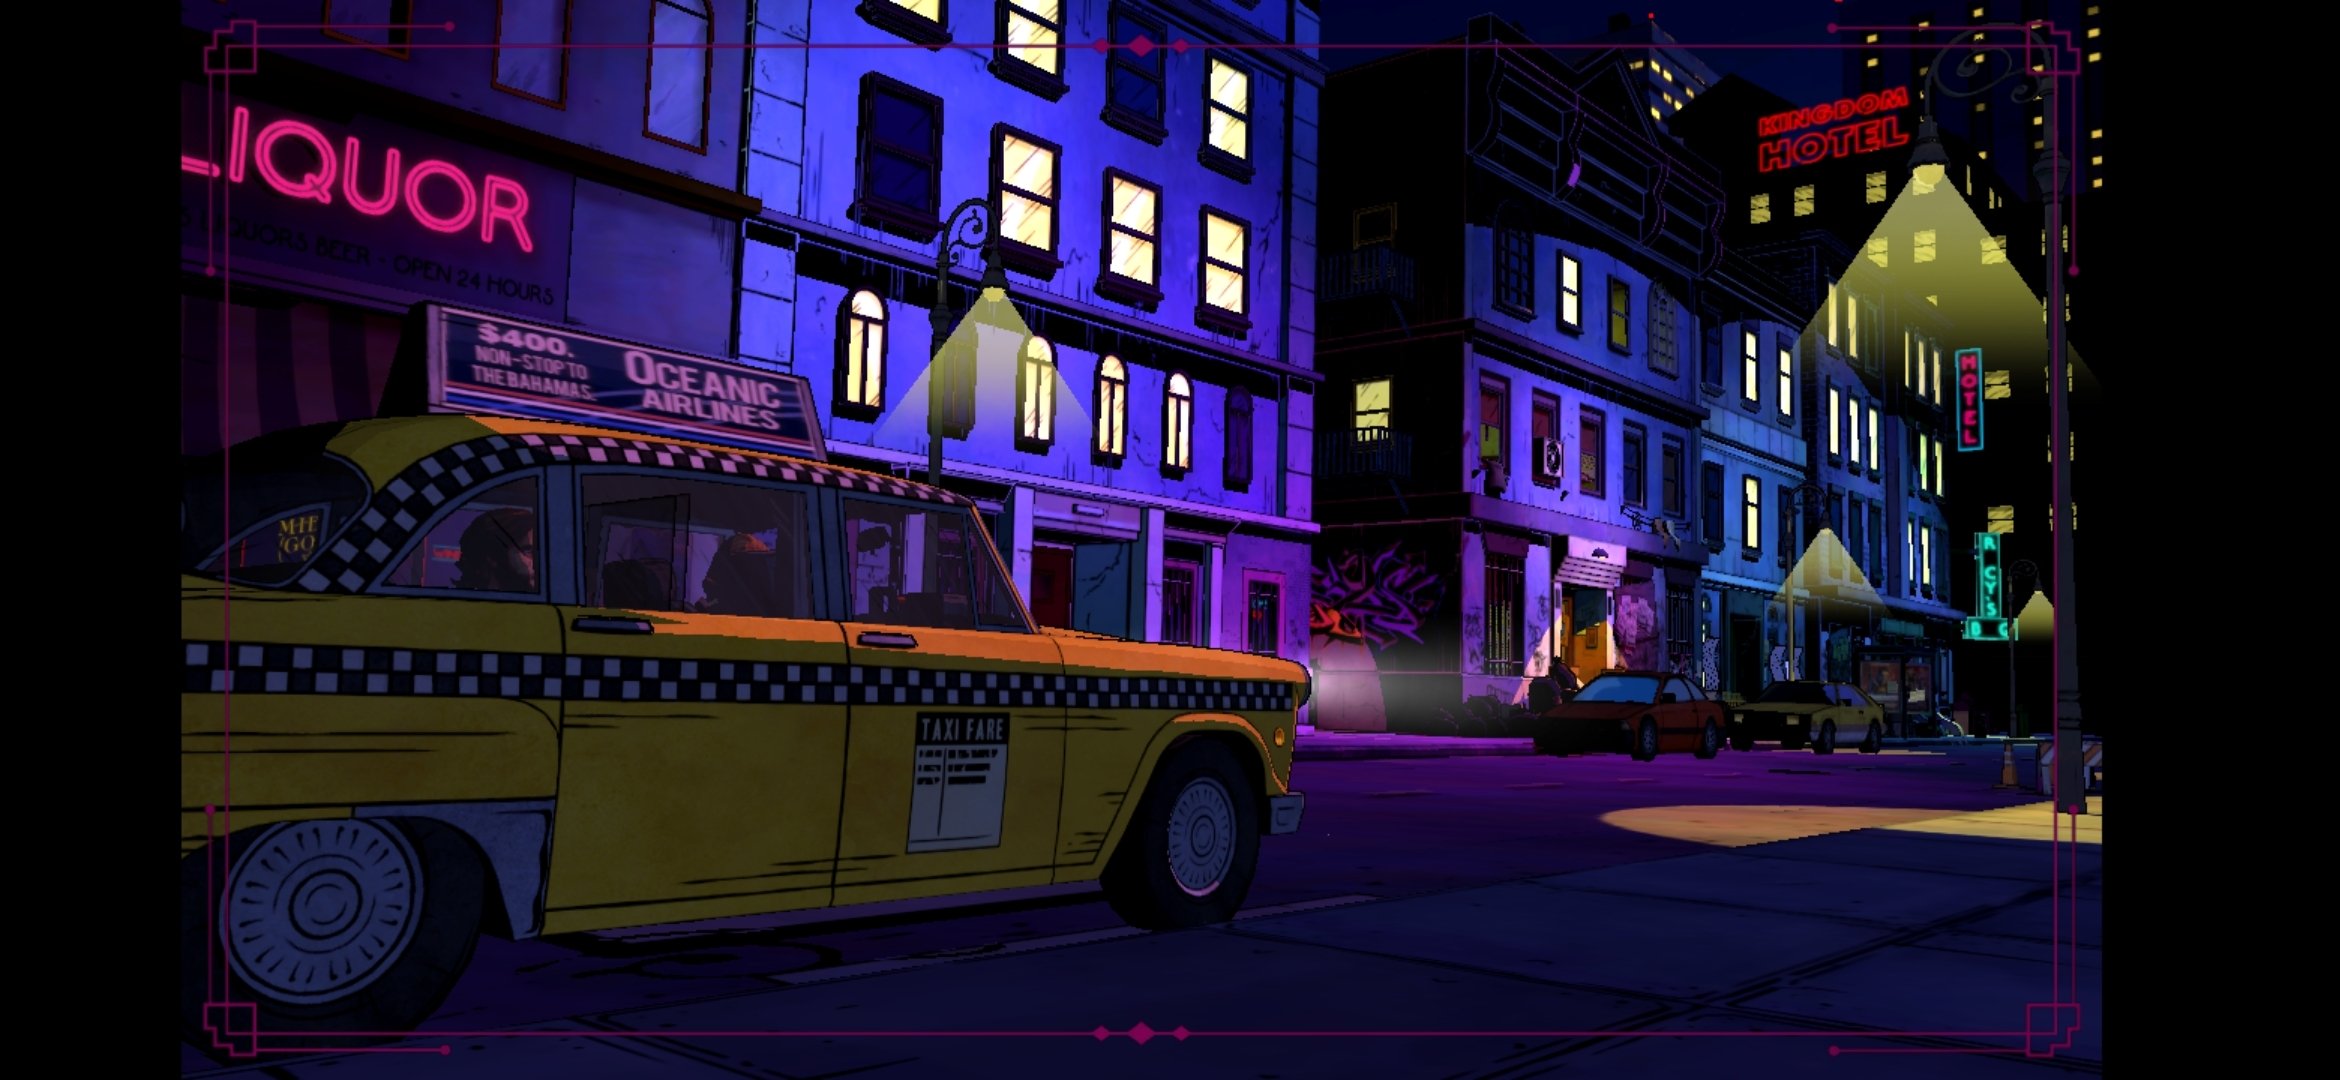 download the last version for windows The Wolf Among Us